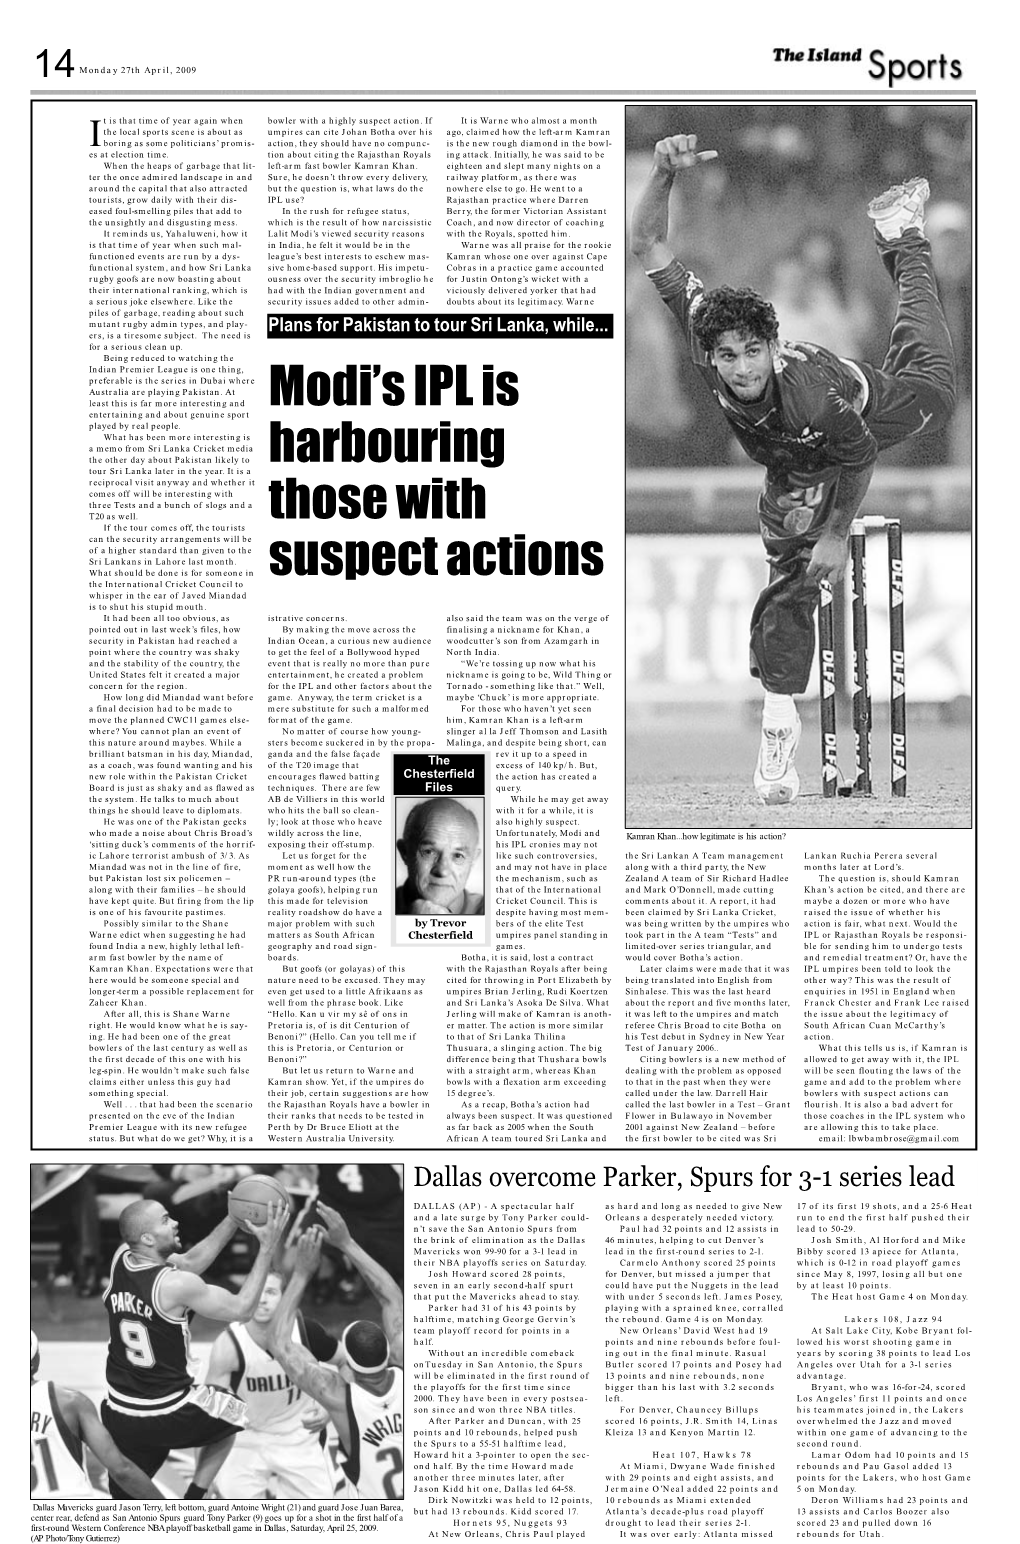 Modi's IPL Is Harbouring Those with Suspect Actions